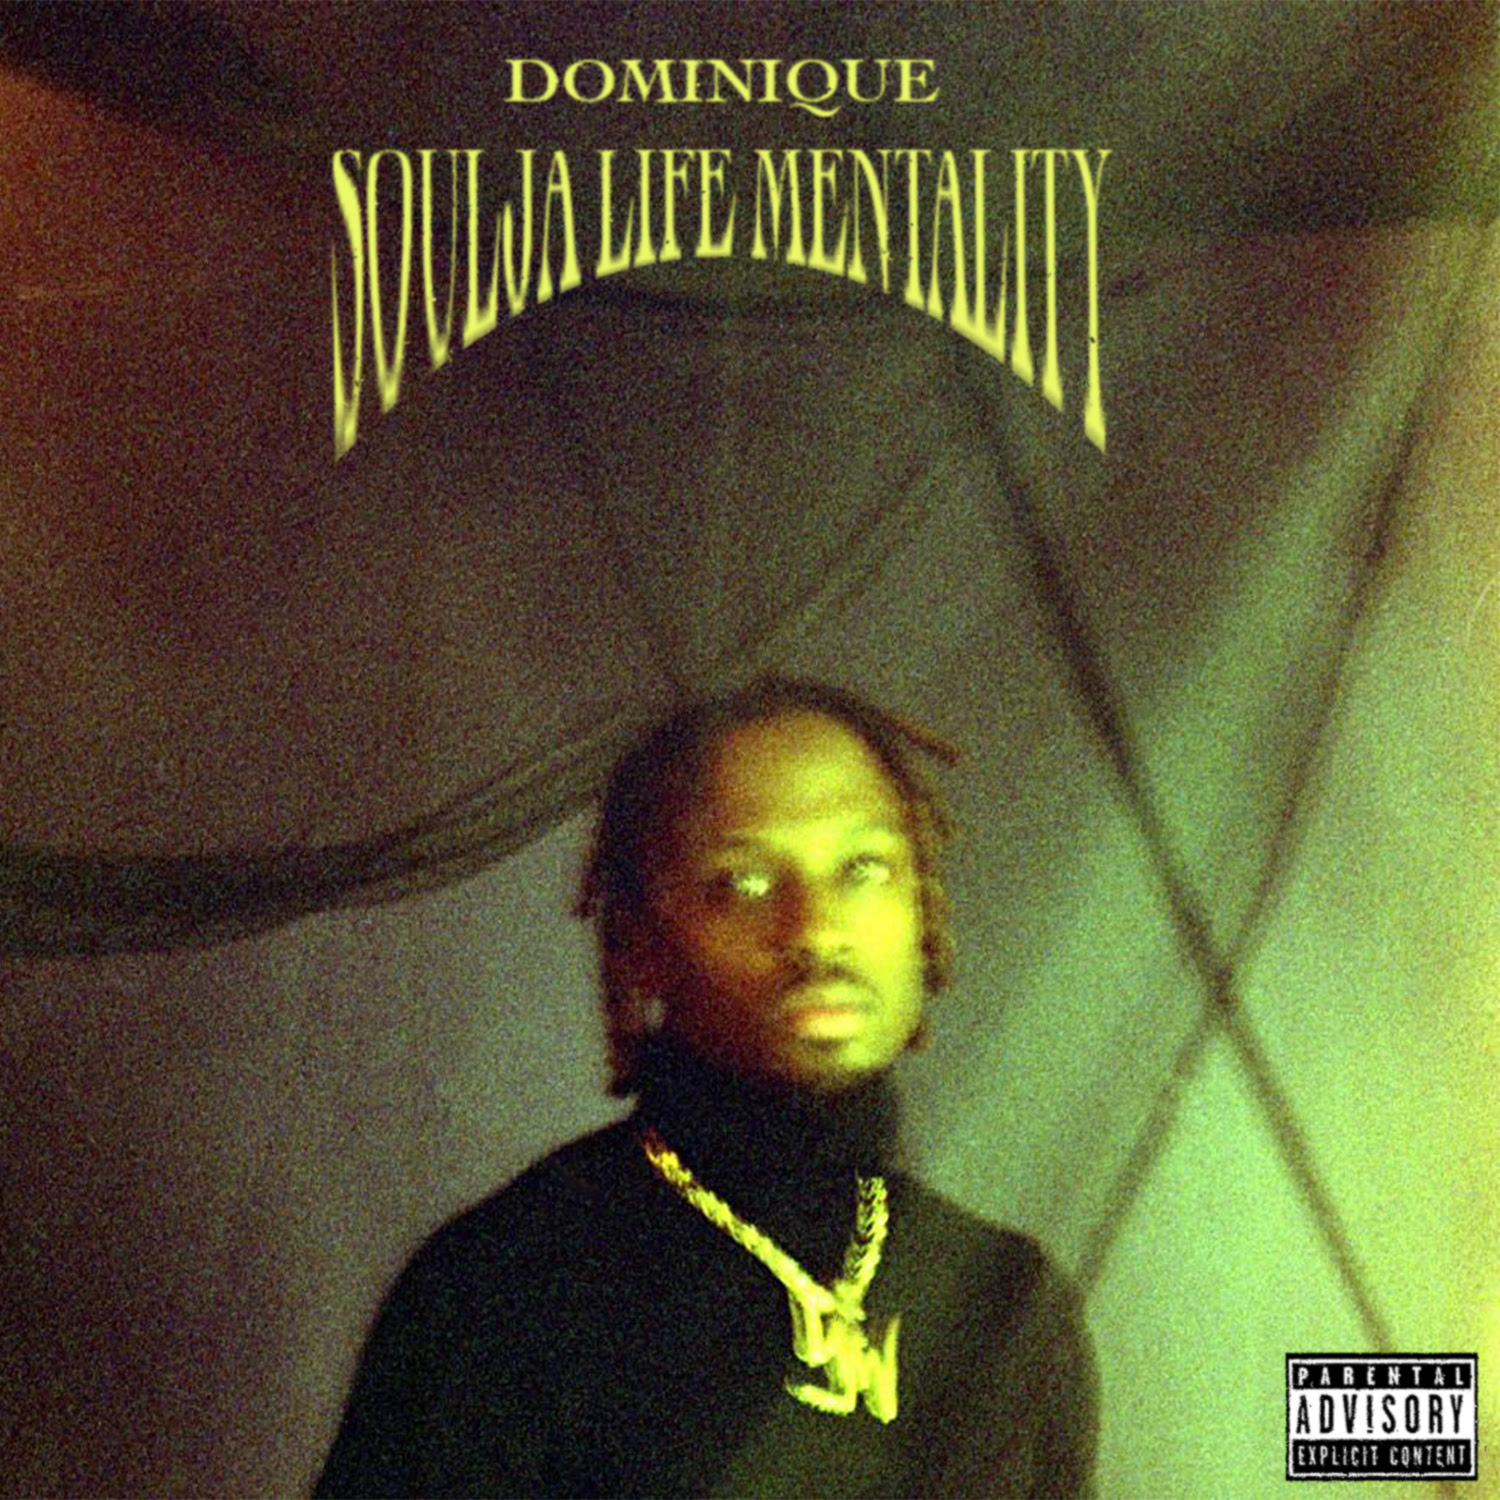 Artist On The Rise Dominique Returns With New Single 'Soulja Life Mentality'